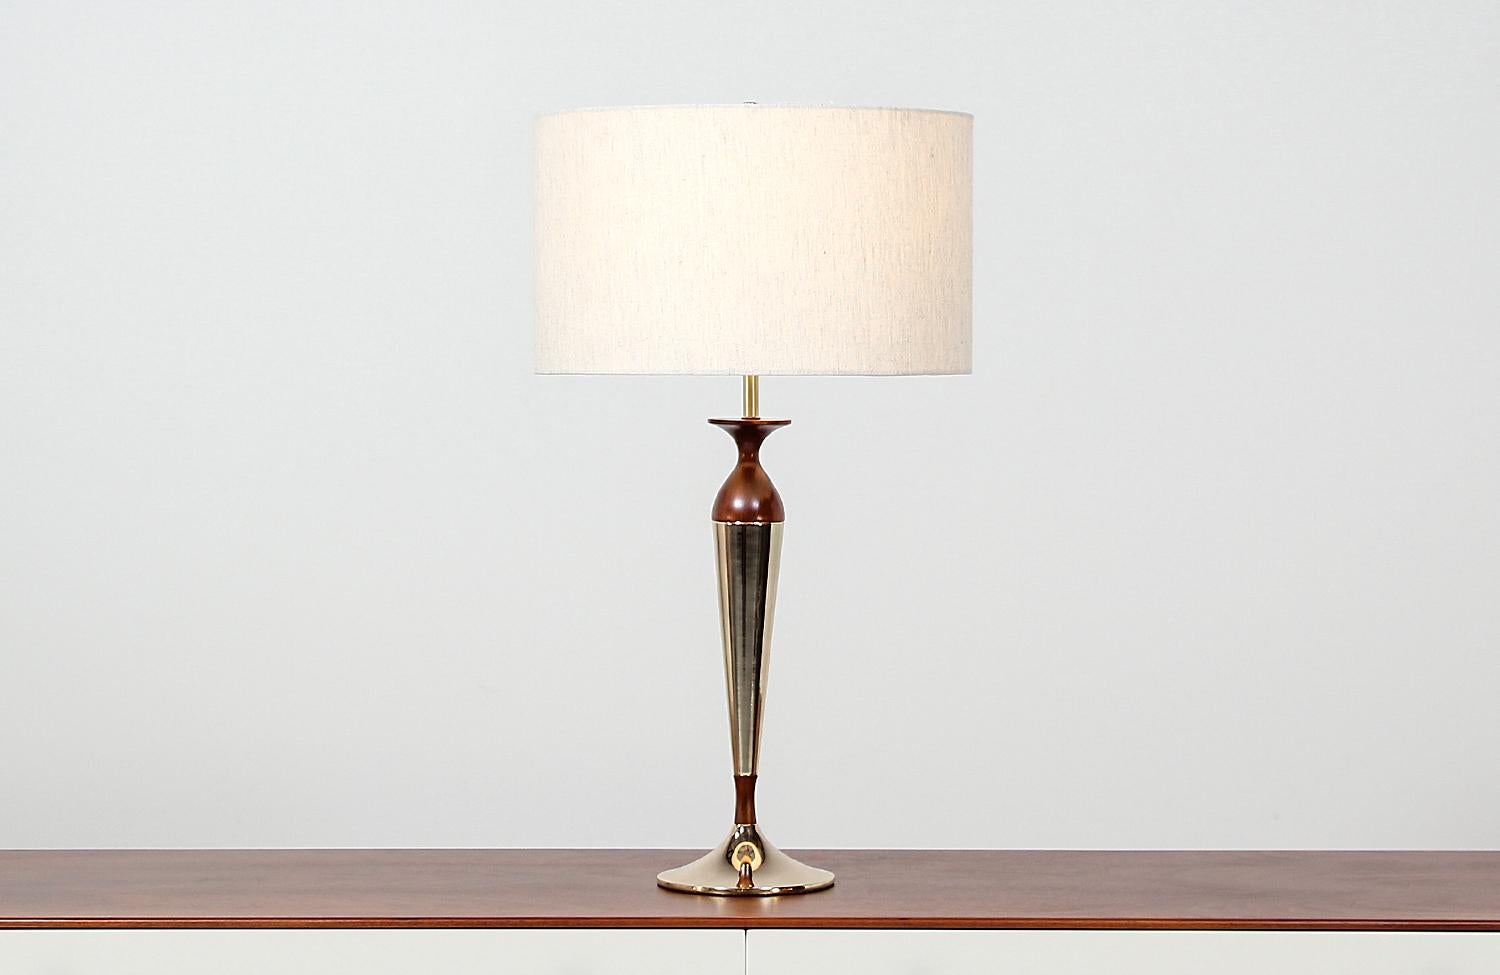 Dazzling table lamp designed by Tony Paul for Westwood Industries in the United States, circa 1950s. This stunning modern table lamp features a walnut wood body resembling the shape of an hourglass and is decorated with newly polished and re-plated